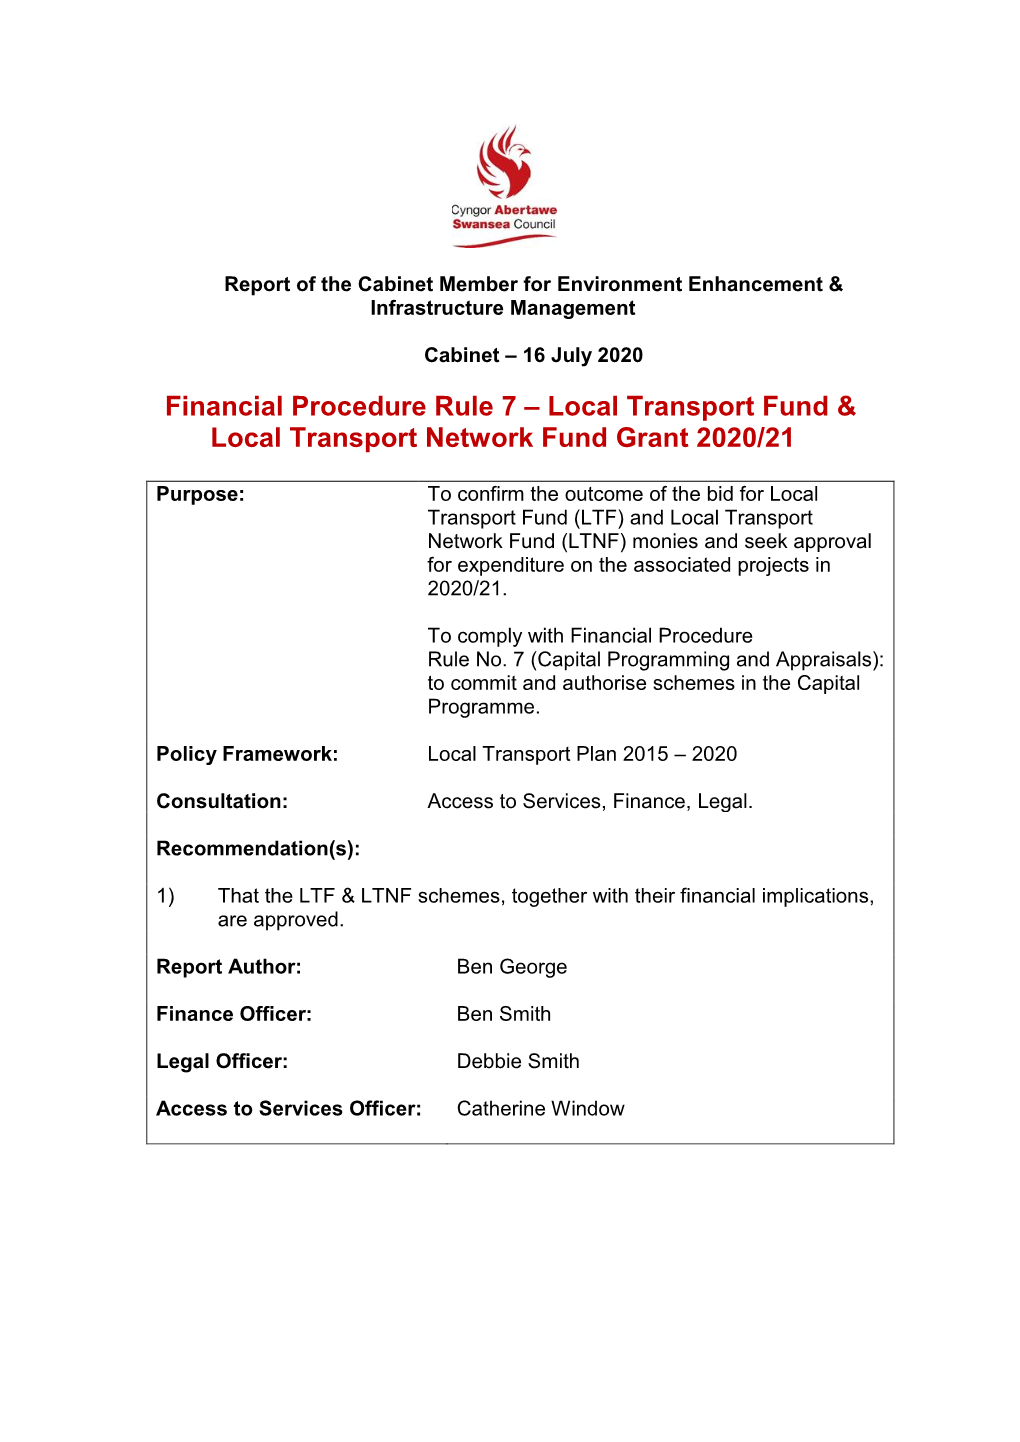 Local Transport Fund & Local Transport Network Fund Grant 2020/21